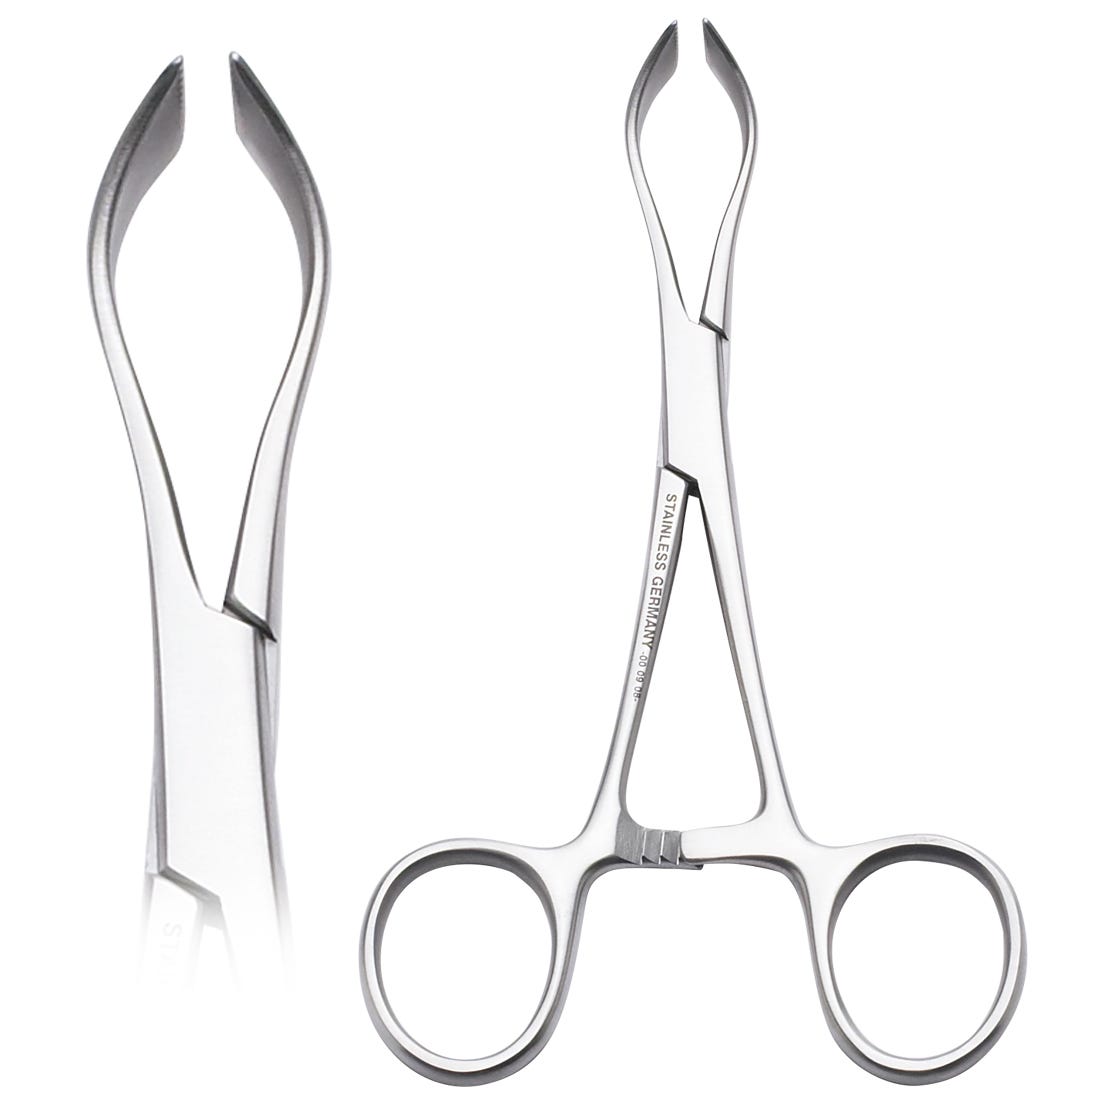 ACE Lorna Nonperforating Towel Forceps